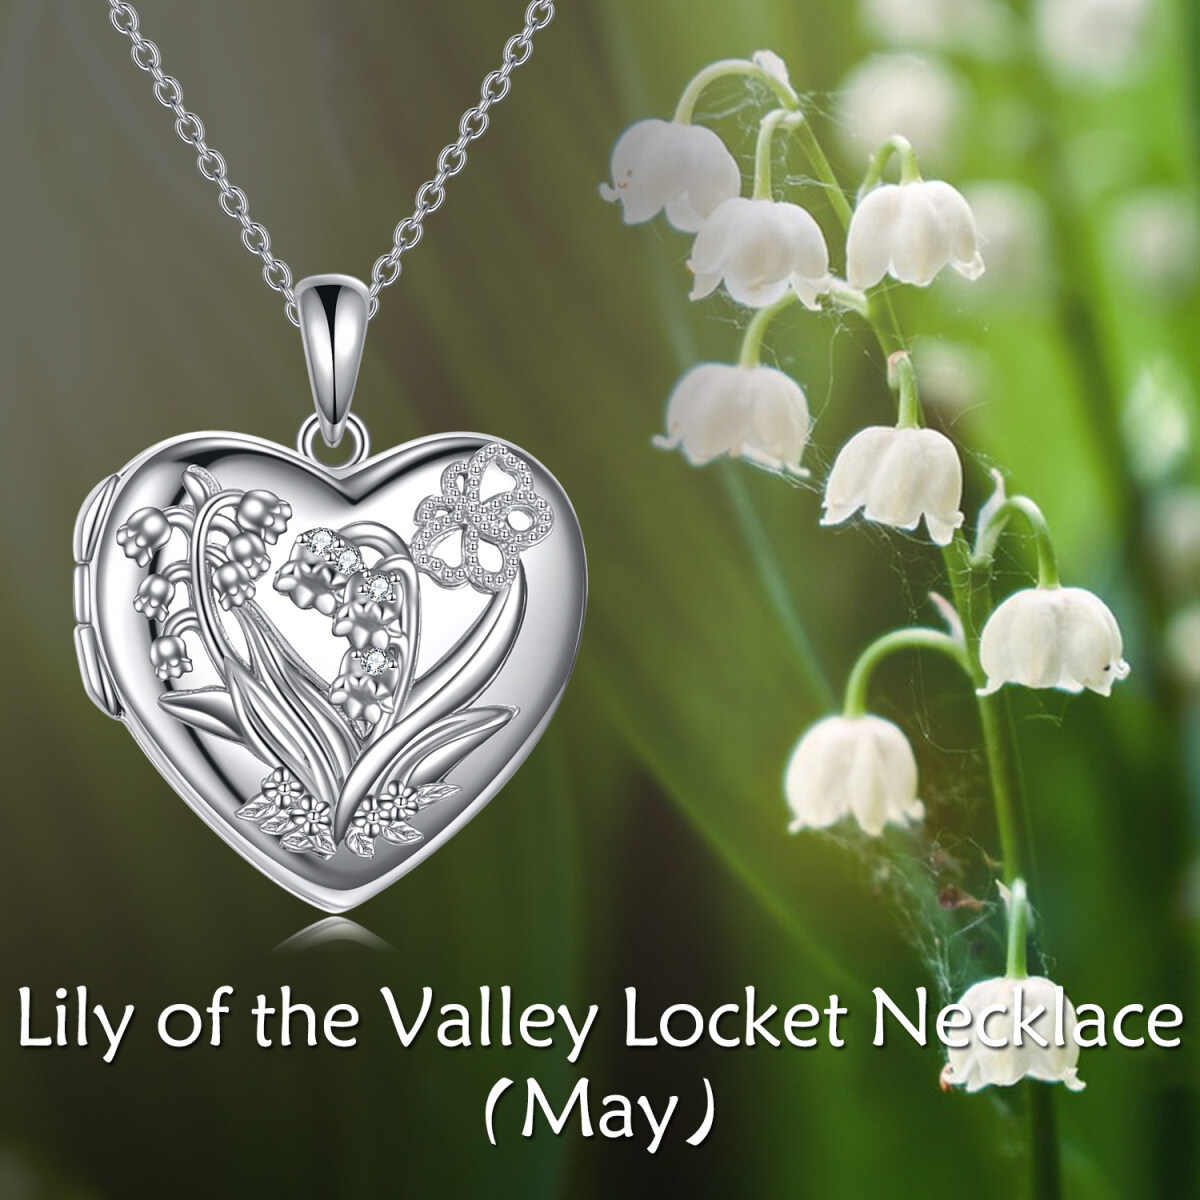 Collier en argent Lily Of The Valley & Photo Personnalisée Collier avec Photo Personnalisé-7